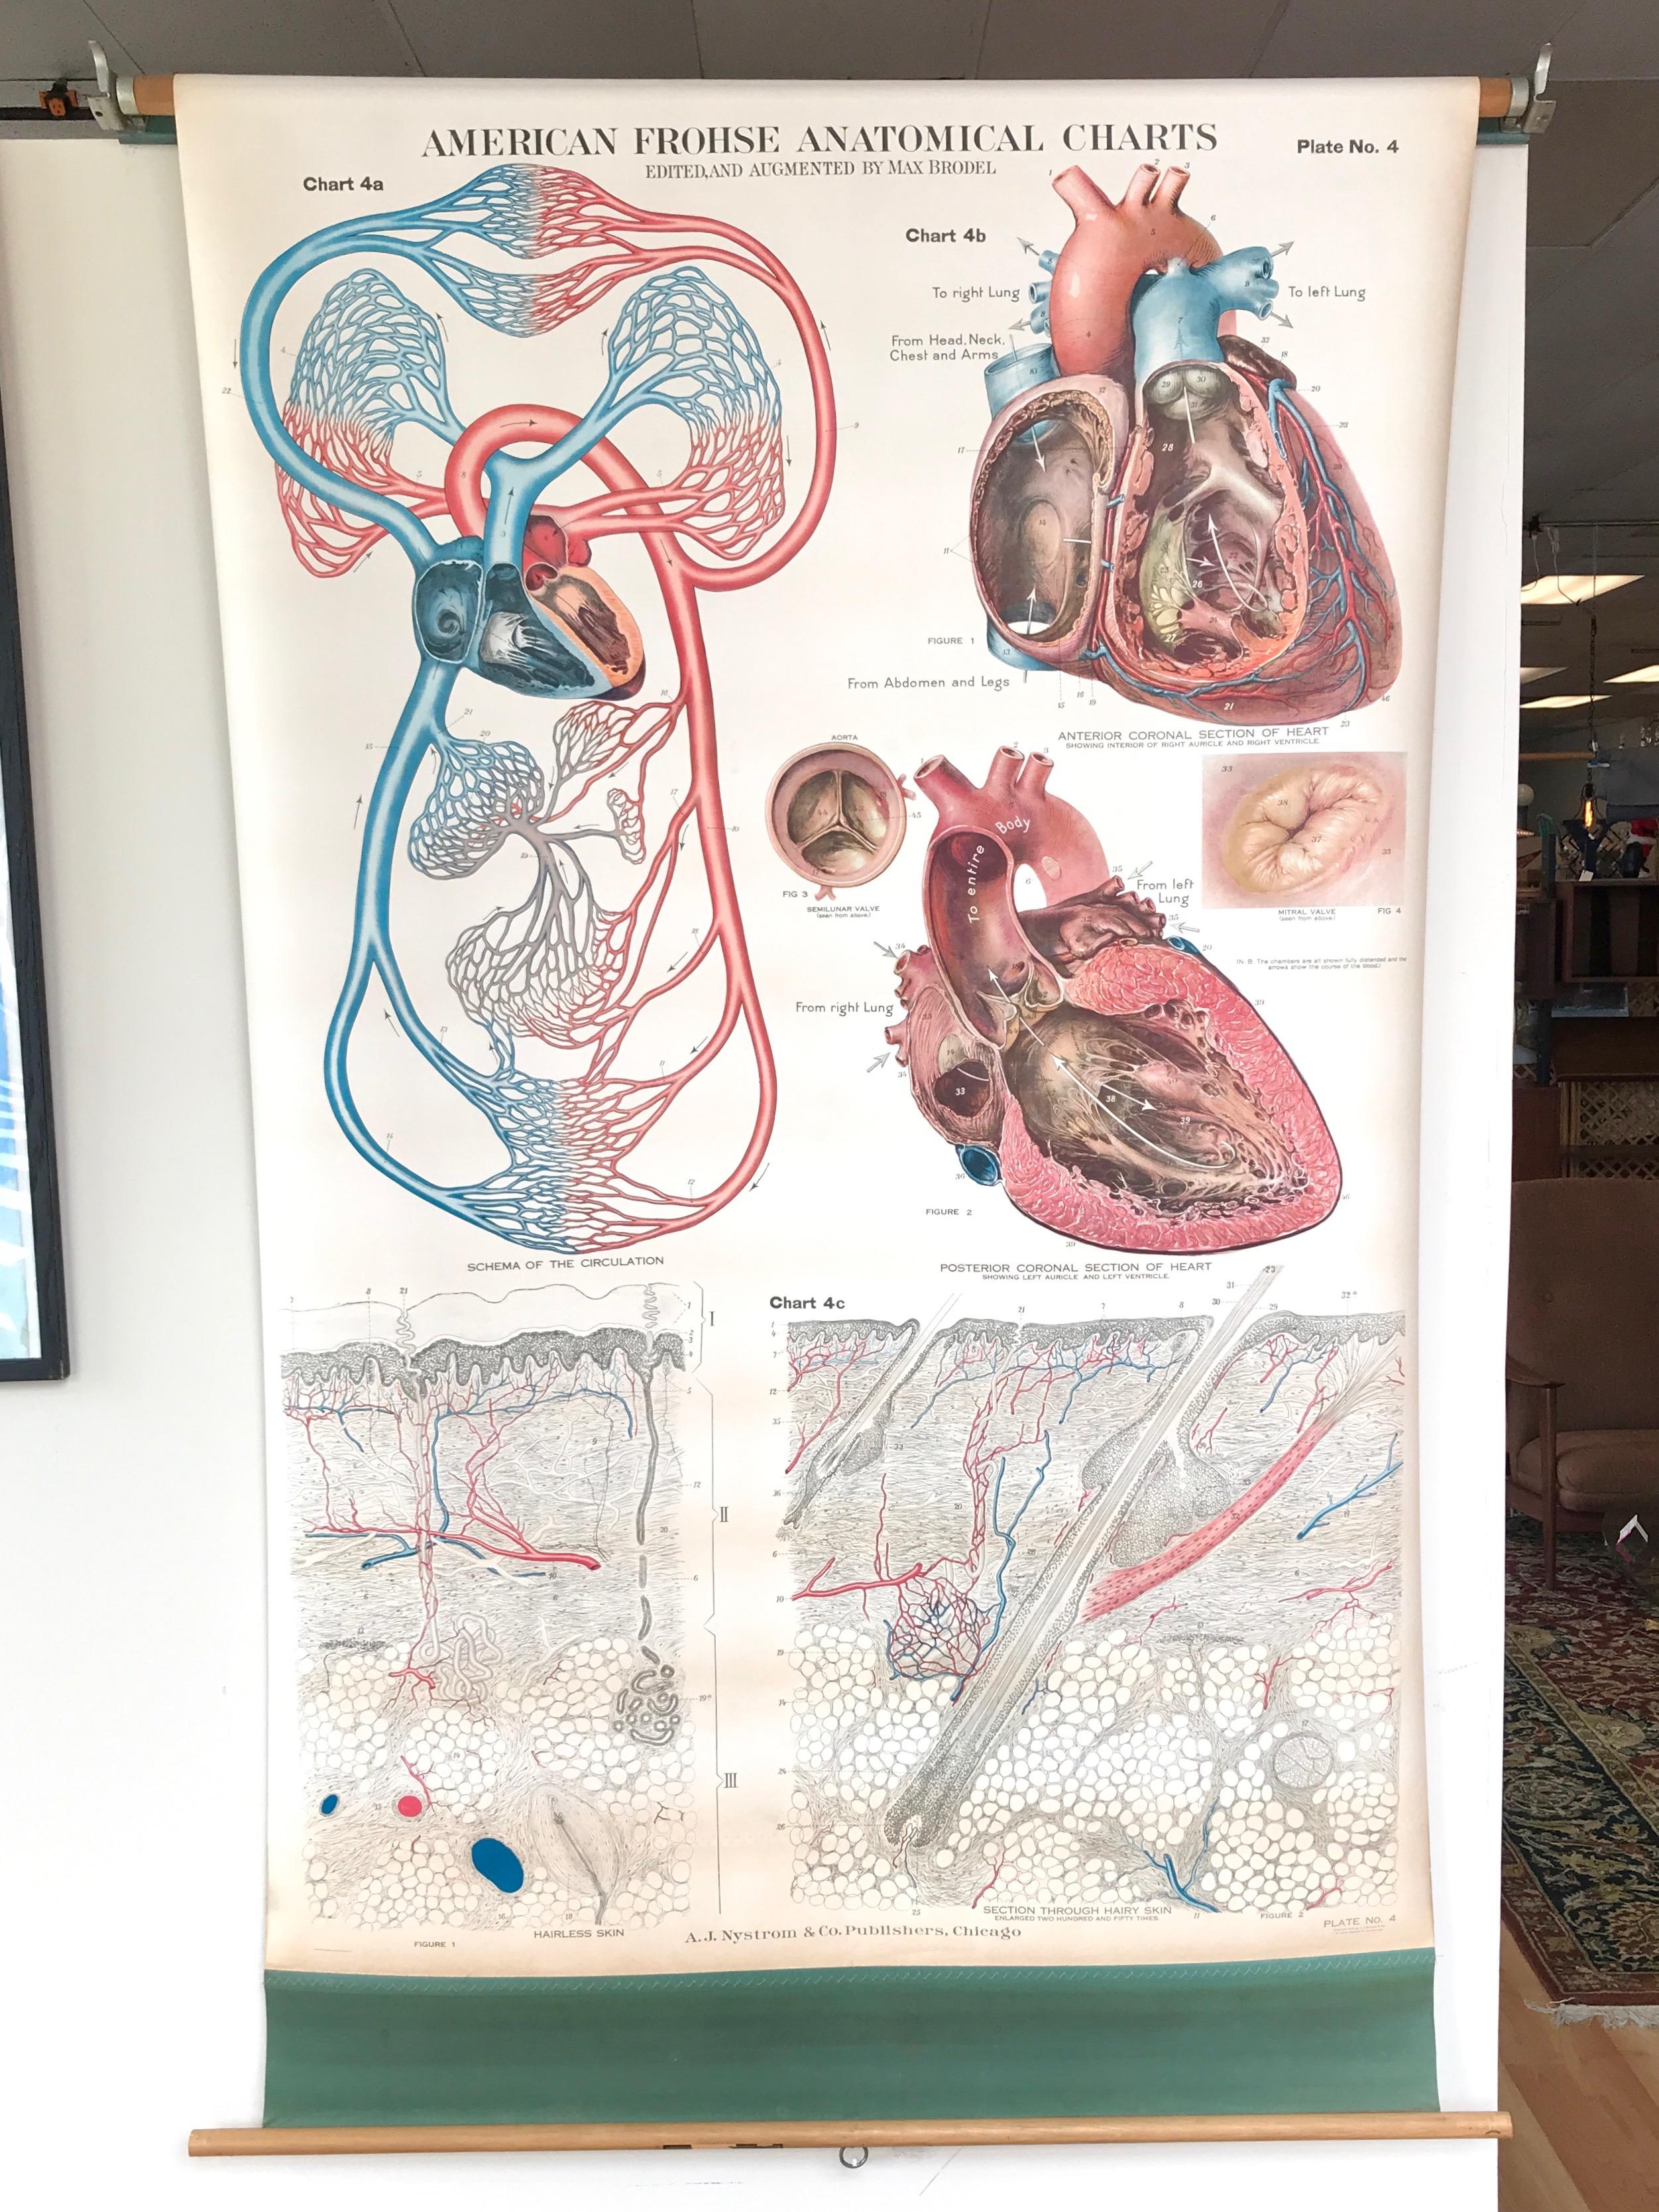 An impressively sized and meticulously executed American Frohse pulldown anatomical chart depicting the human circulatory system, published by A.J. Nystrom & Co., Chicago.

Plate No. 4 in an influential series of large, highly detailed color